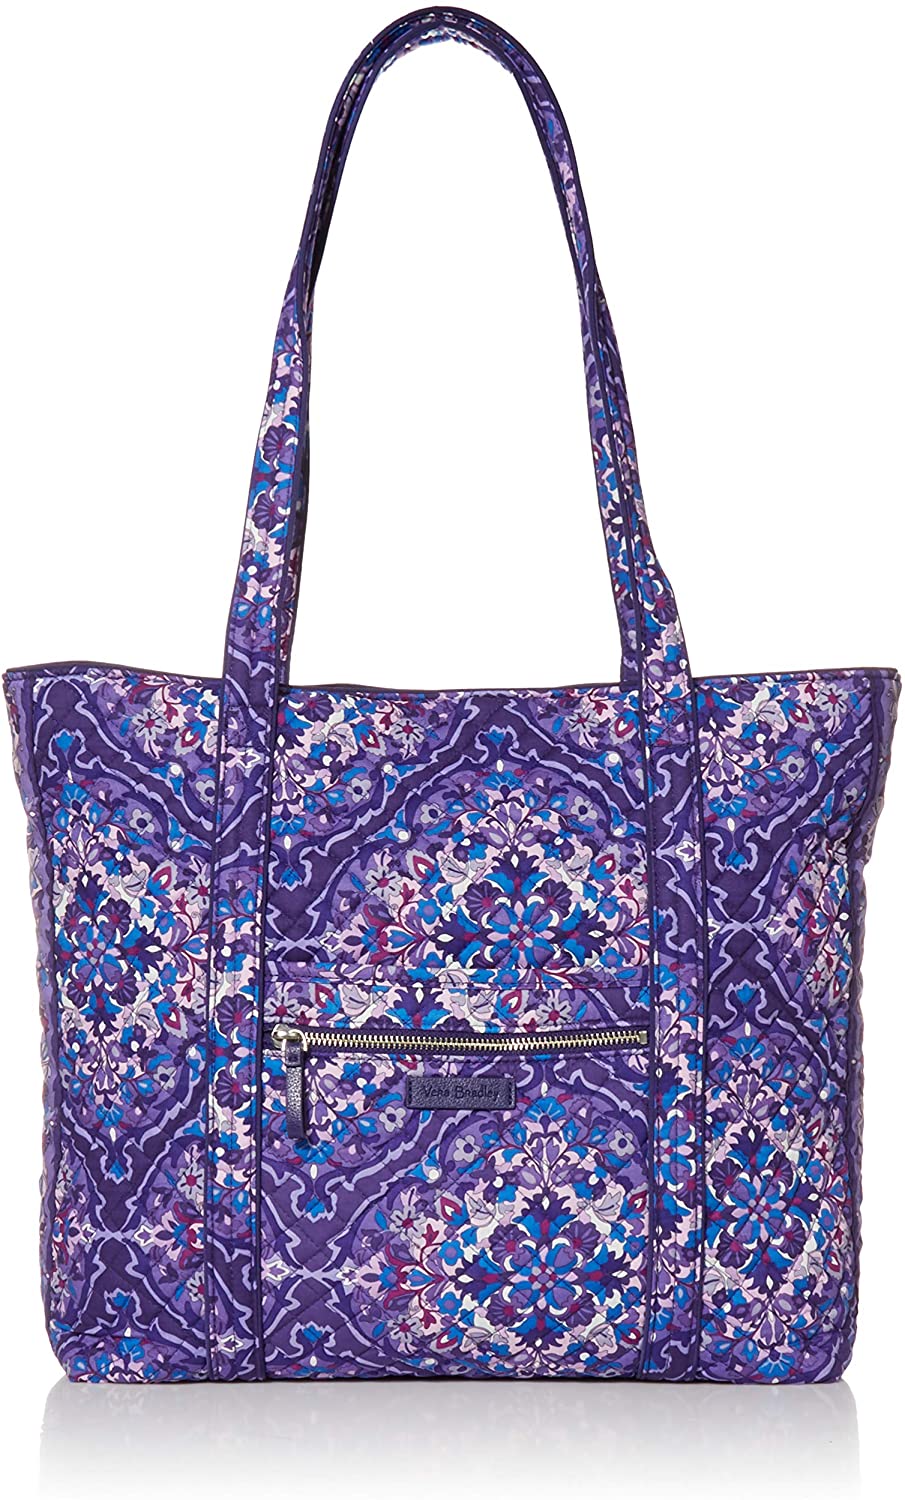 Up to 50% Off Vera Bradley bags at the Amazon Summer Sale | Entertainment Tonight